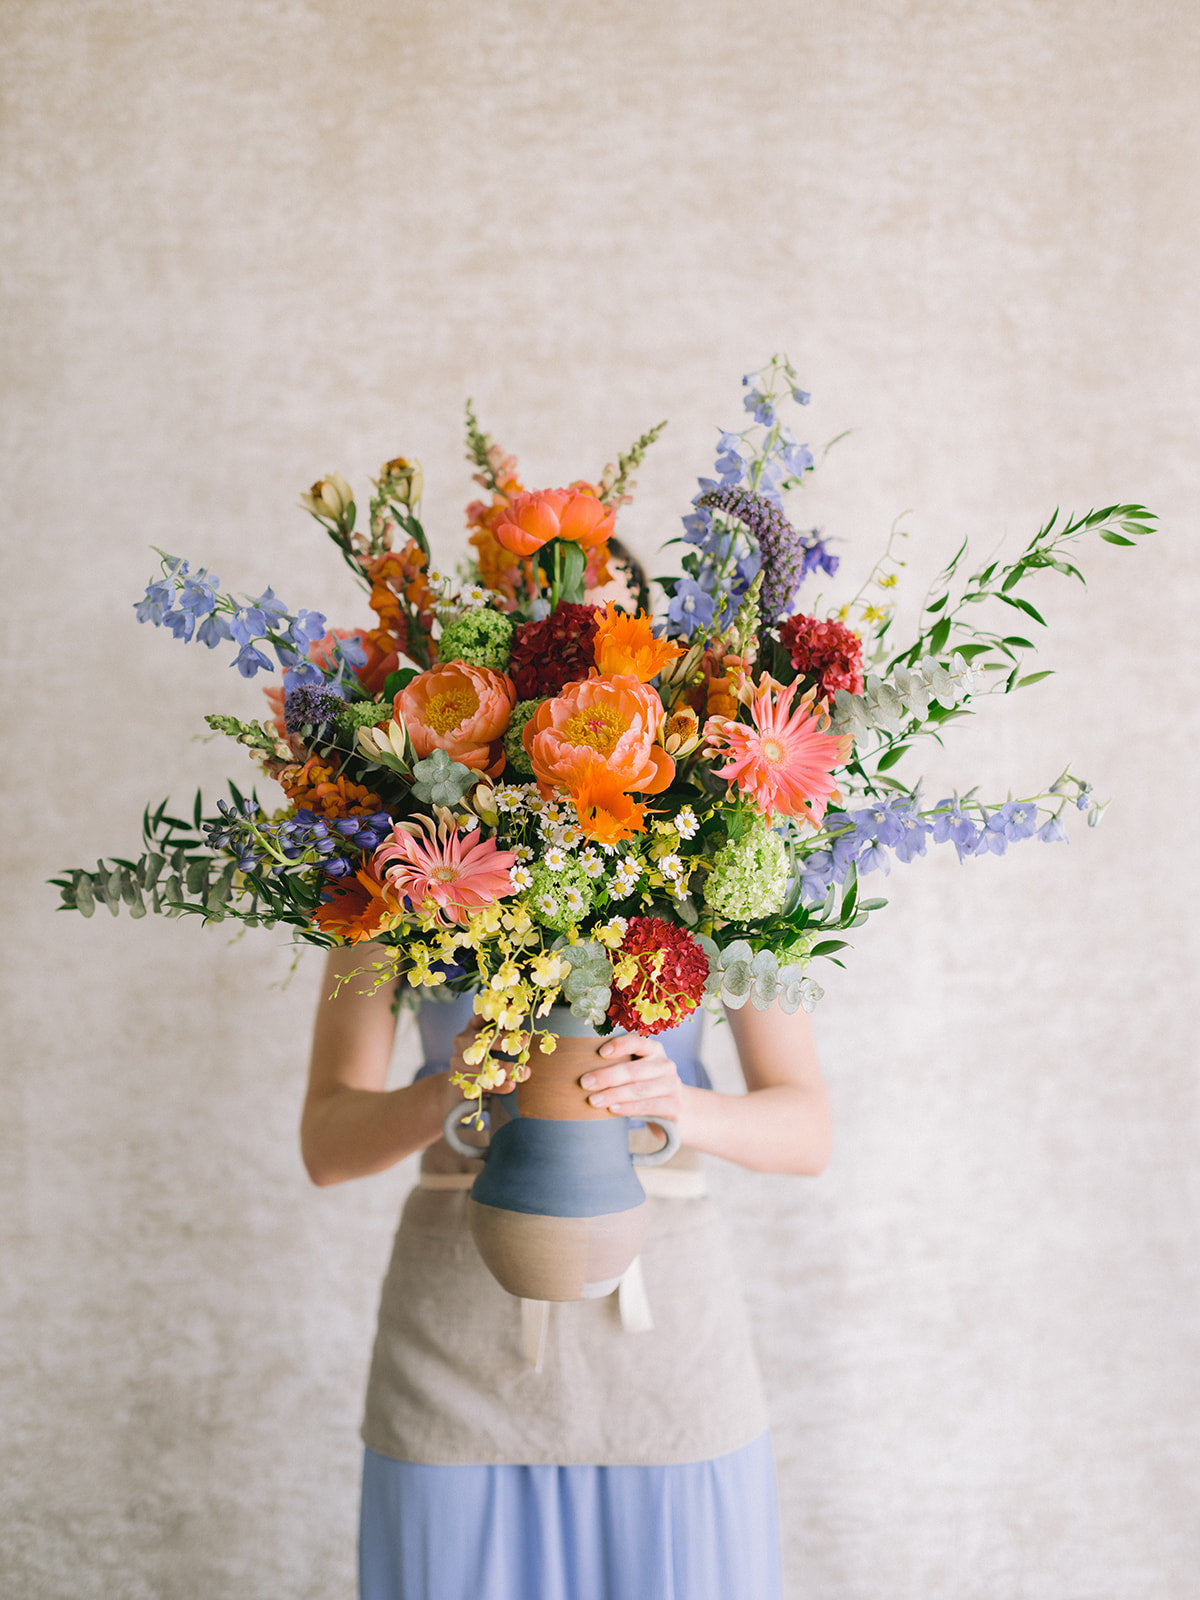 Flower Subscription: Save 10%